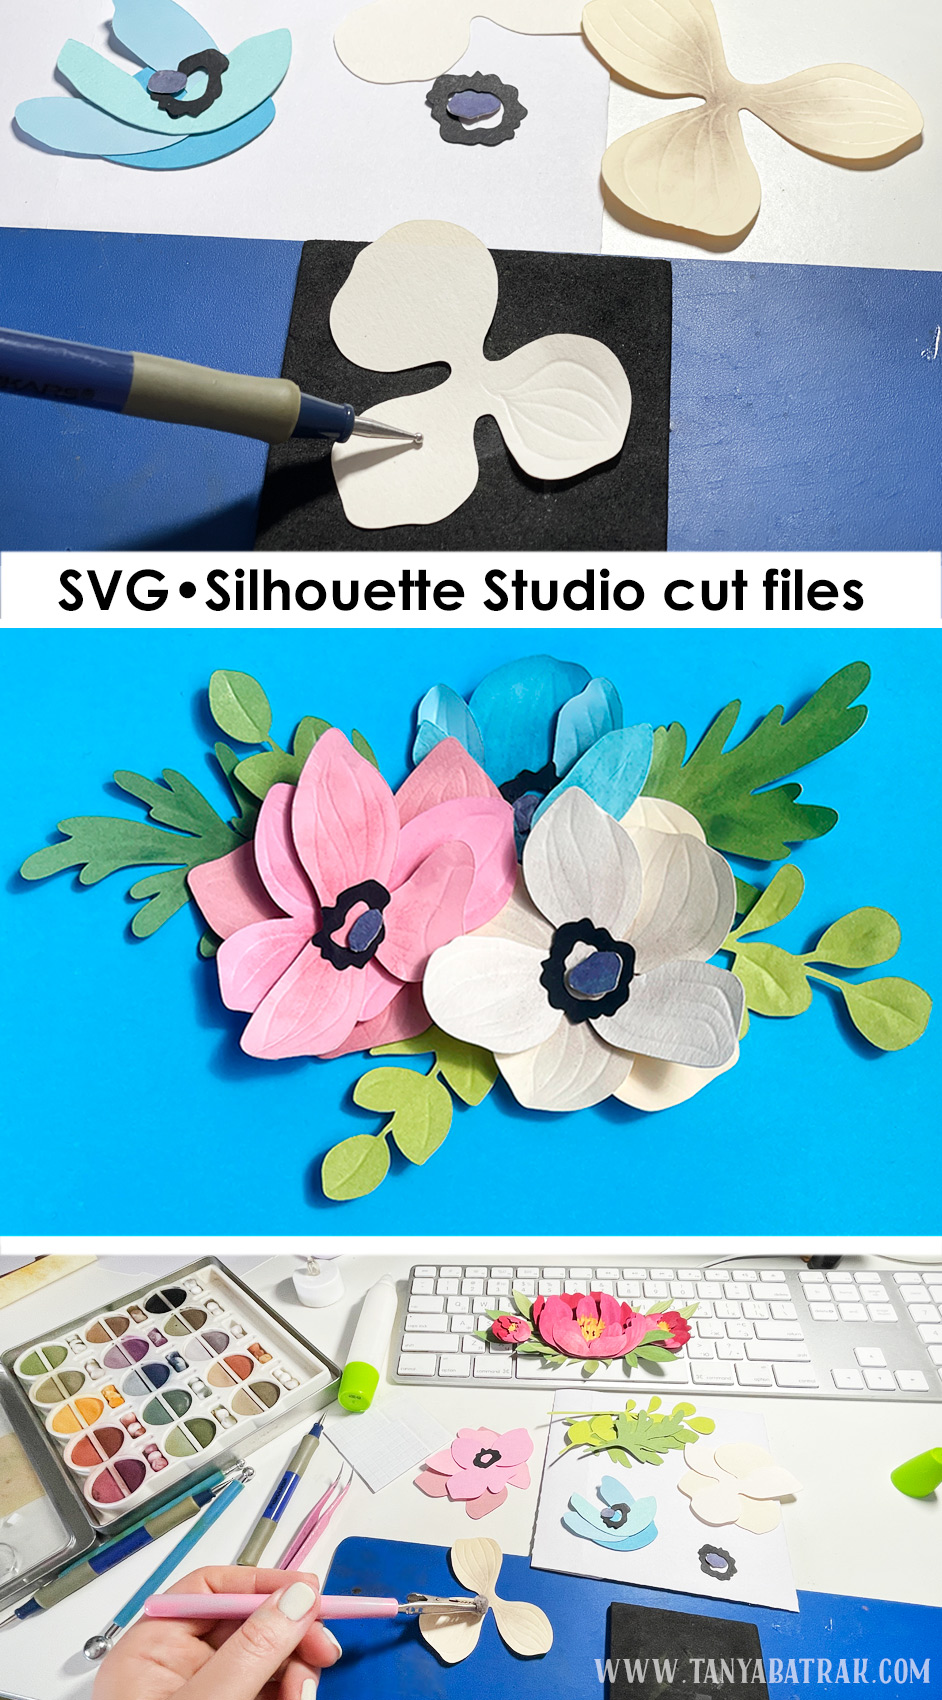 Layered Flowers Clusters SVG Cut File